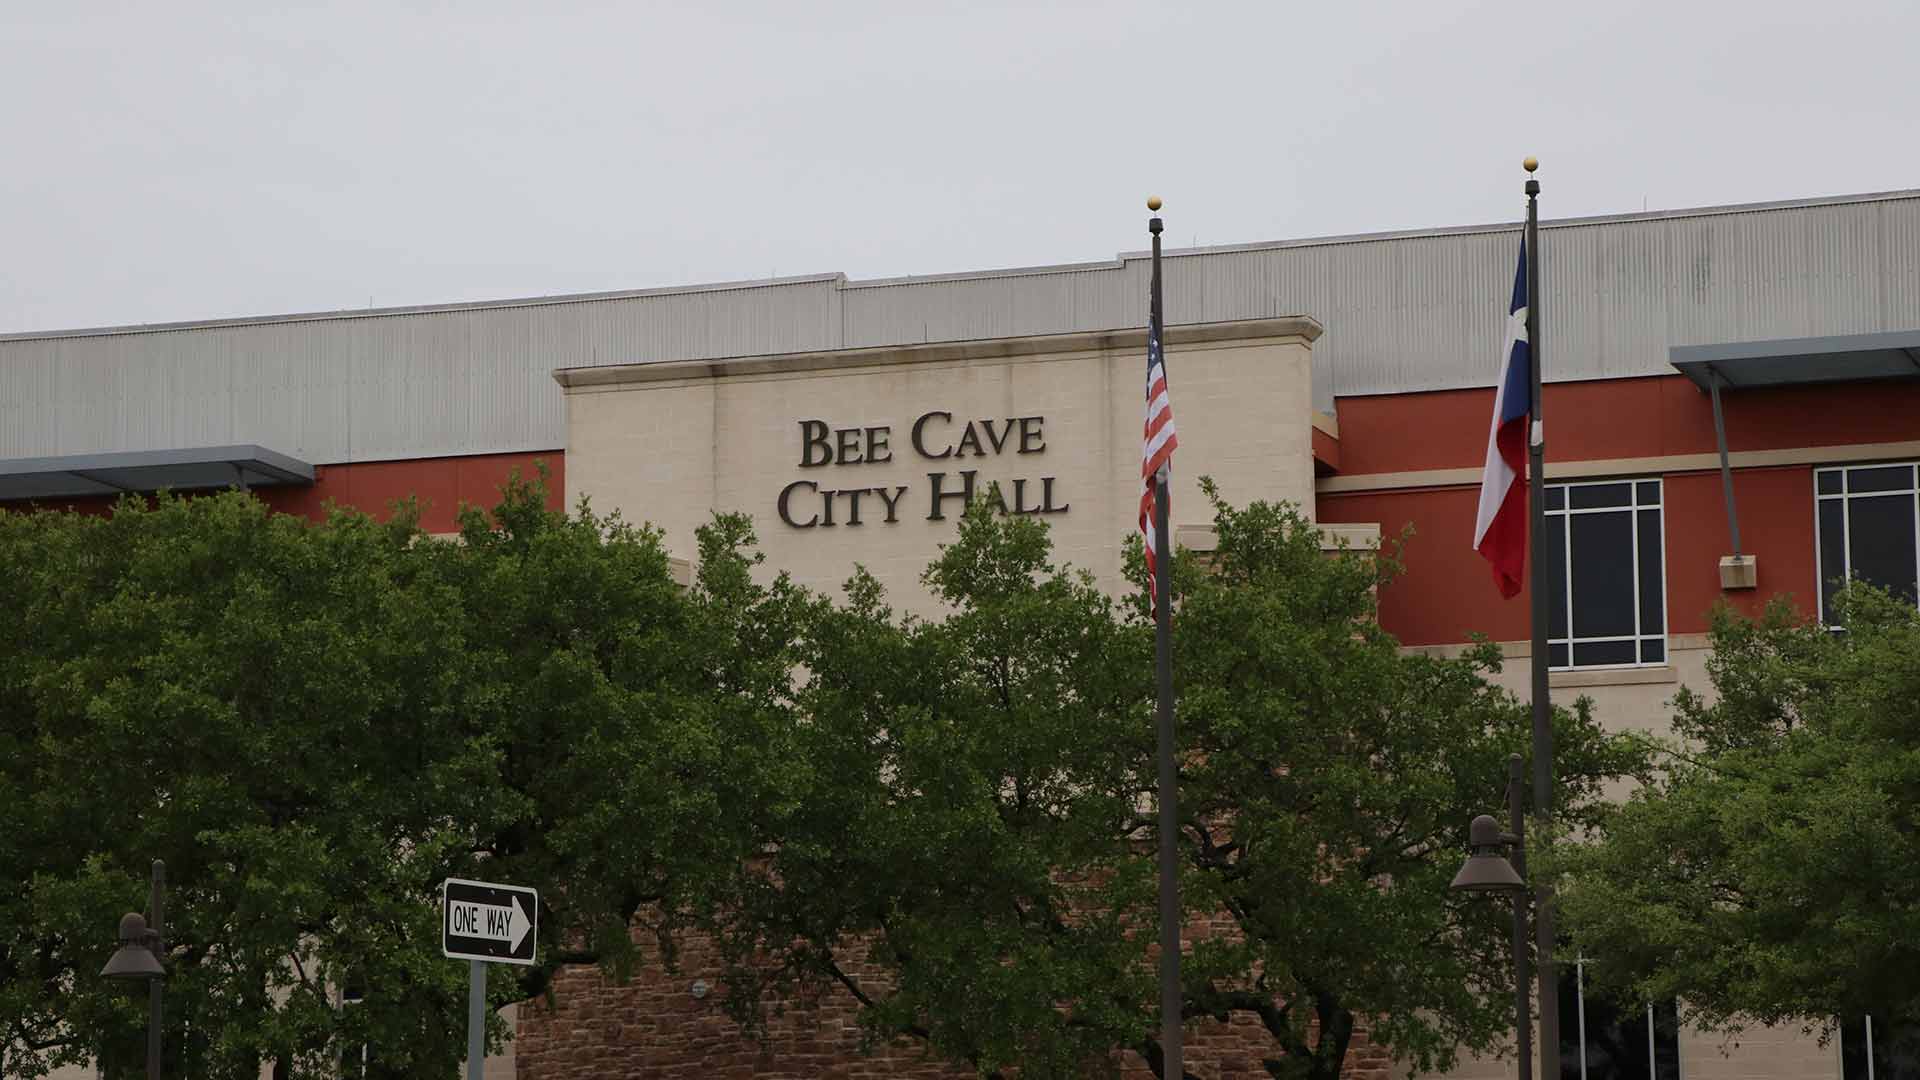 City hall building in Bee Cave, Texas.